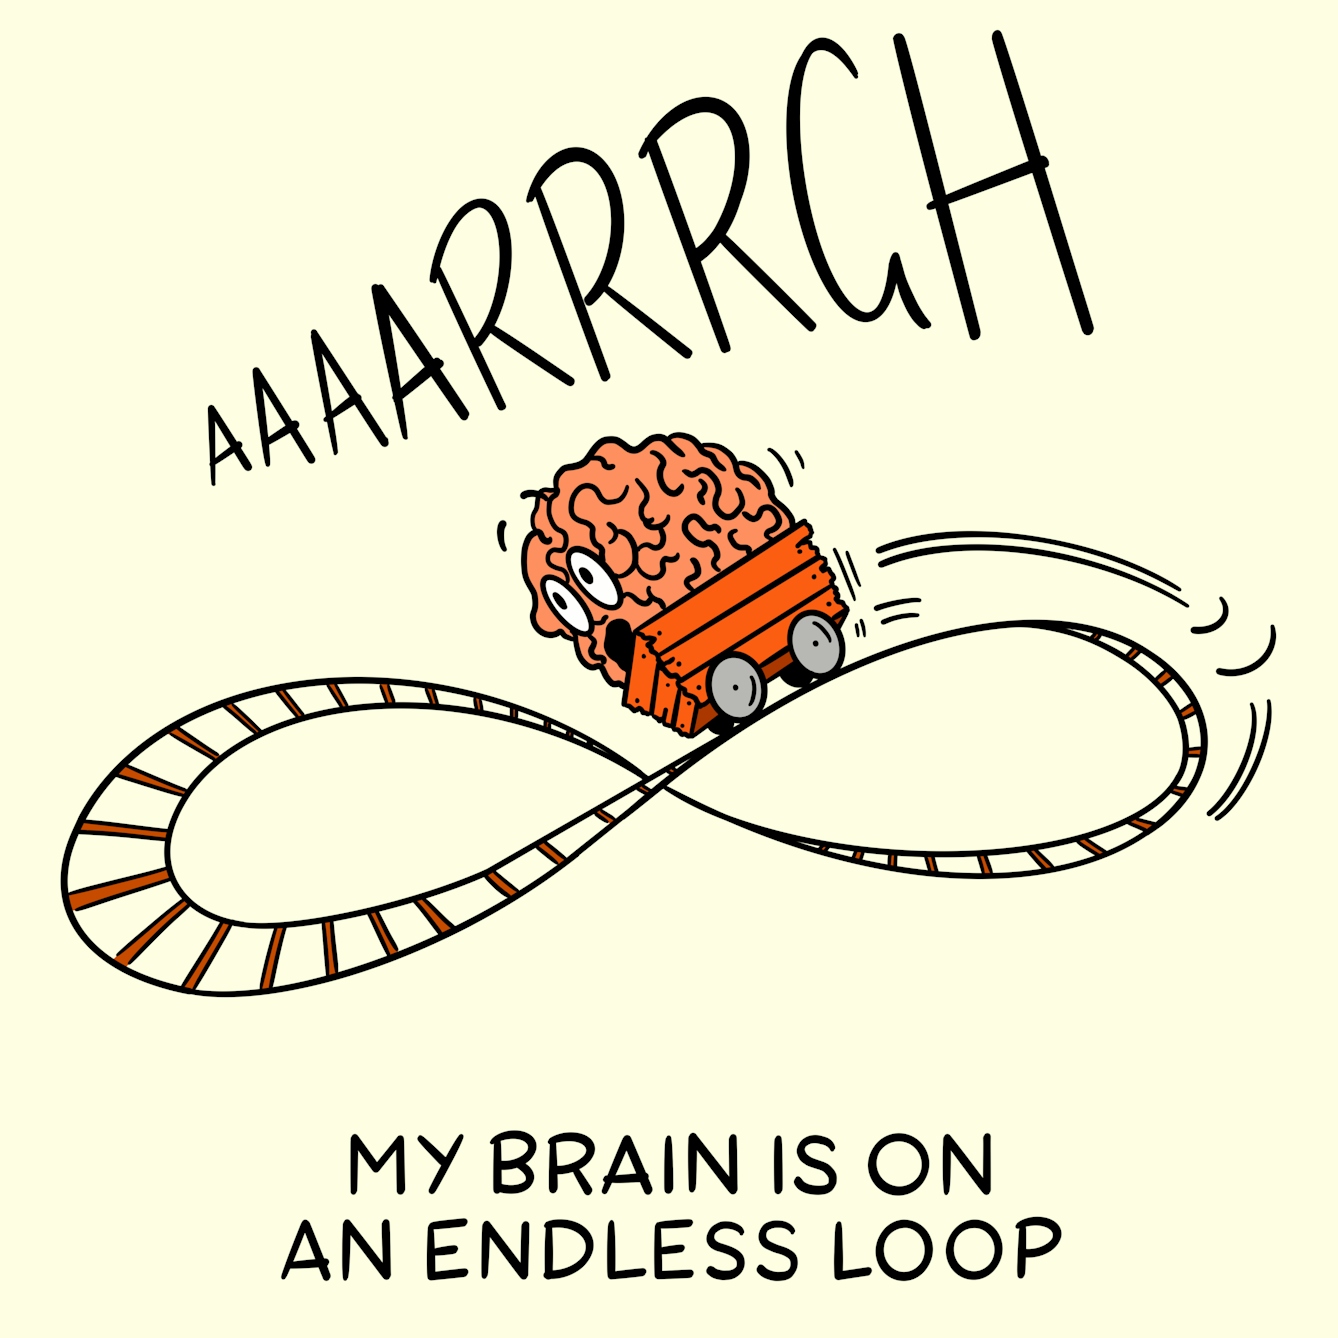 Panel 1 of a four-panel comic drawn digitally: a brain with eyes and eyebrows raised in surprise and an open mouth rides in a mine cart upon a track in the shape of an infinity loop, with "Aaarrrgh" written above. The caption text reads "My brain is on an endless loop"